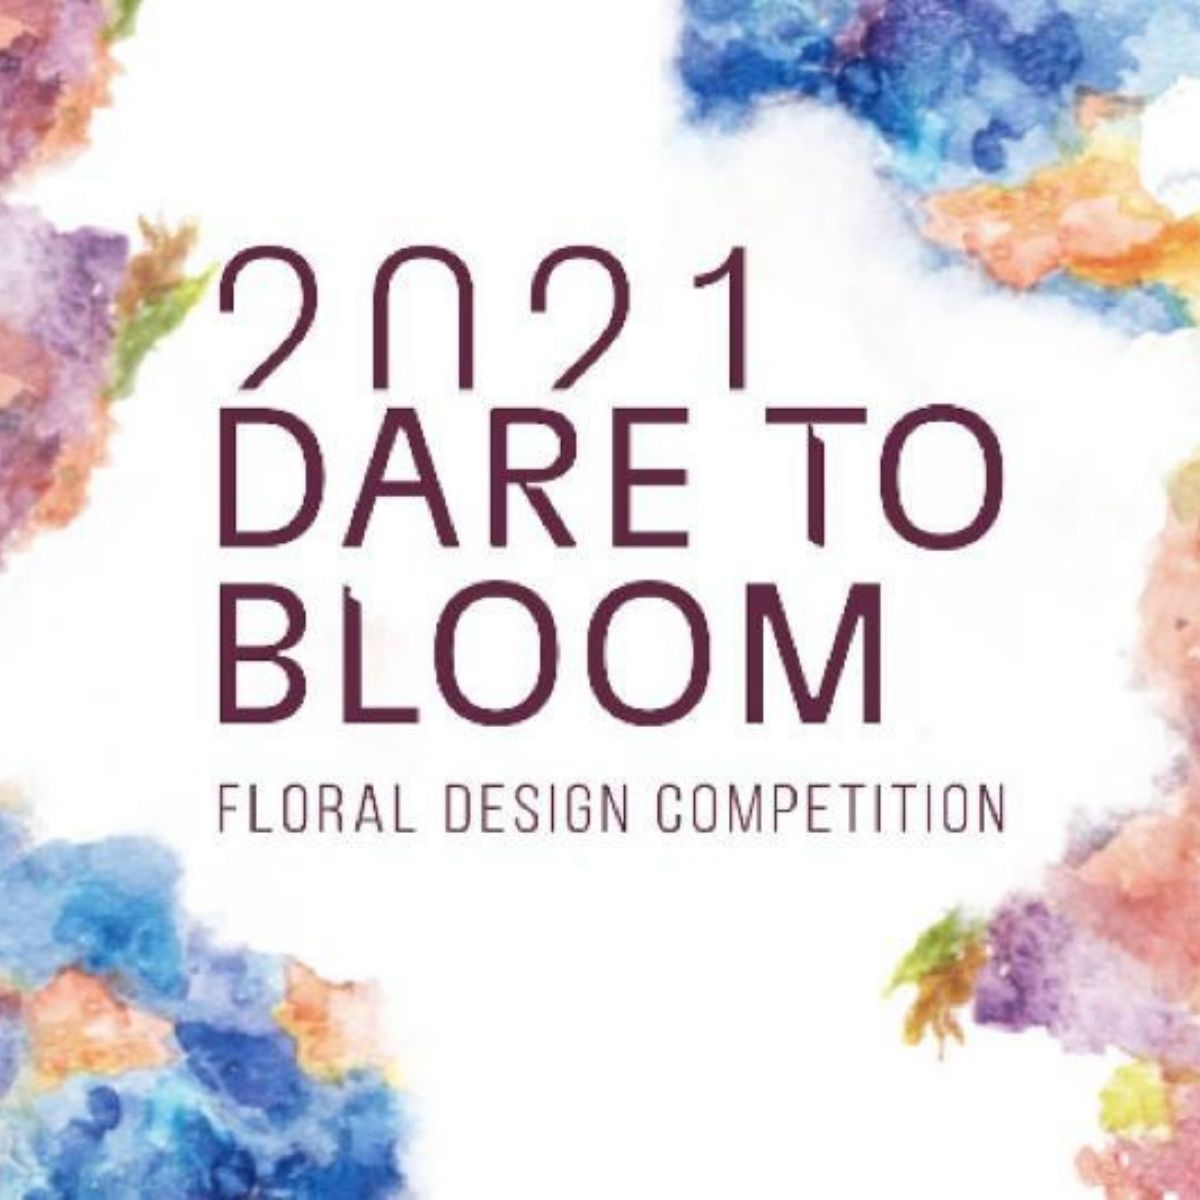 dare-to-bloom-with-lulu-floral-design-competition-2021-featured